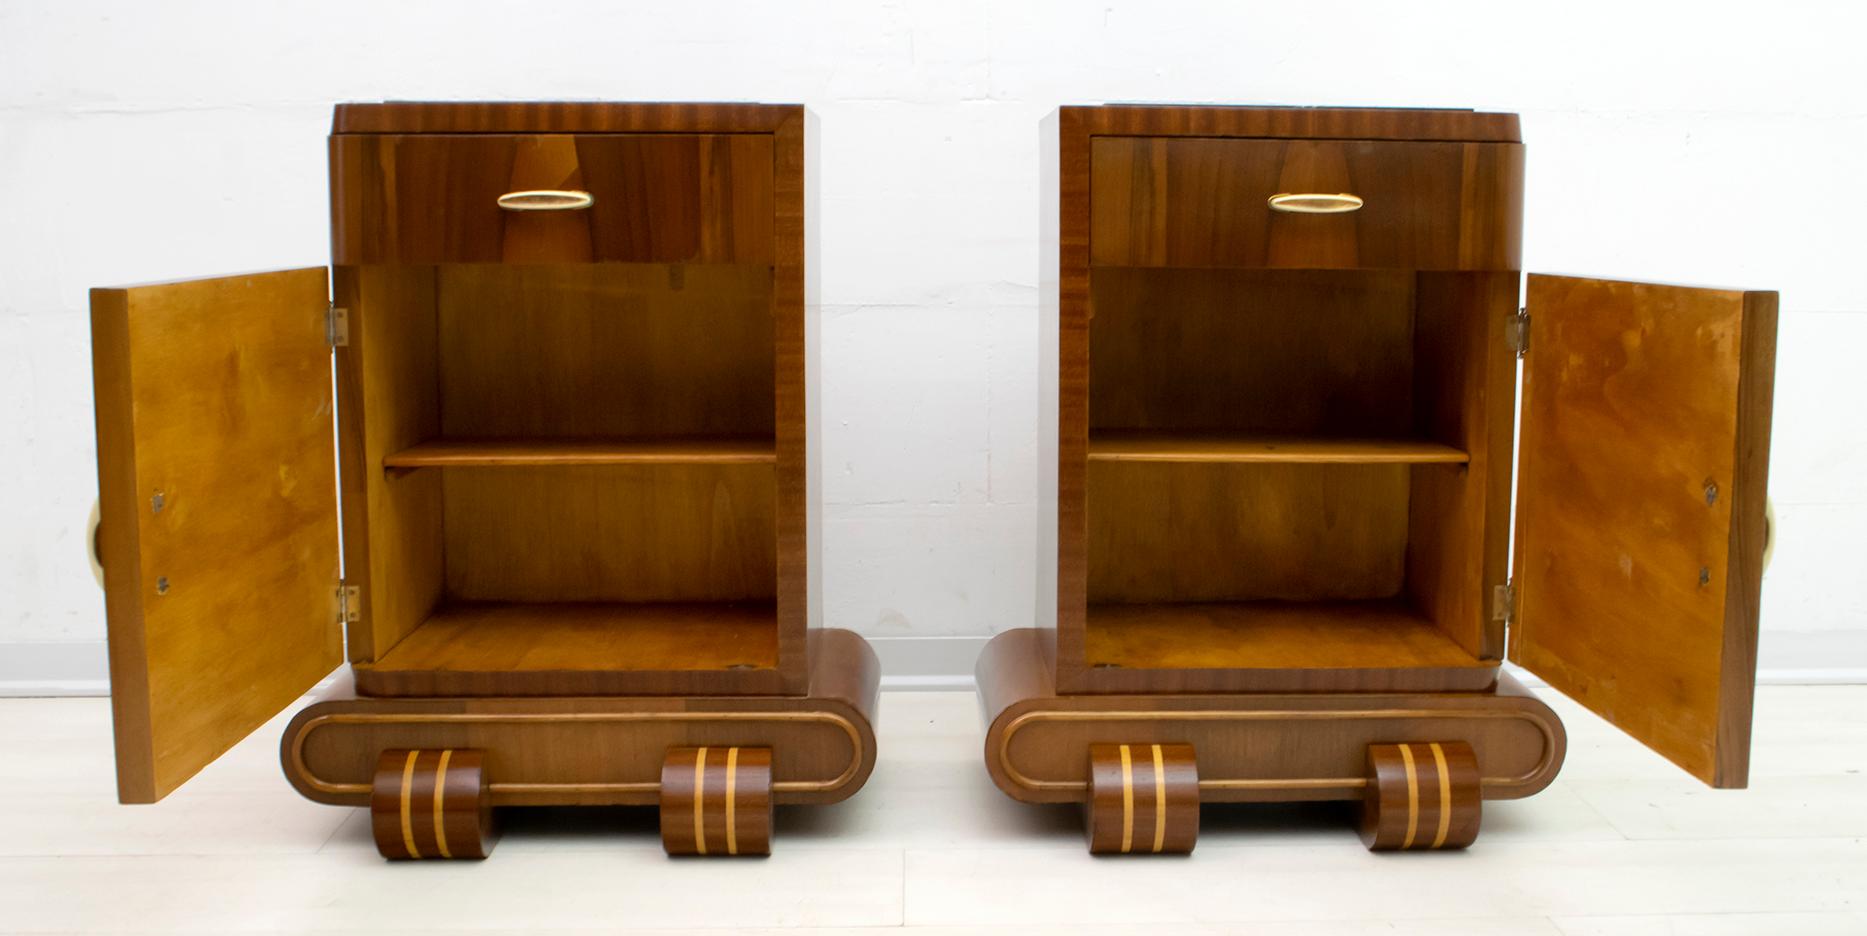 Early 20th Century Pair of Art Deco Italian Walnut and Maple Night Stands, 1920